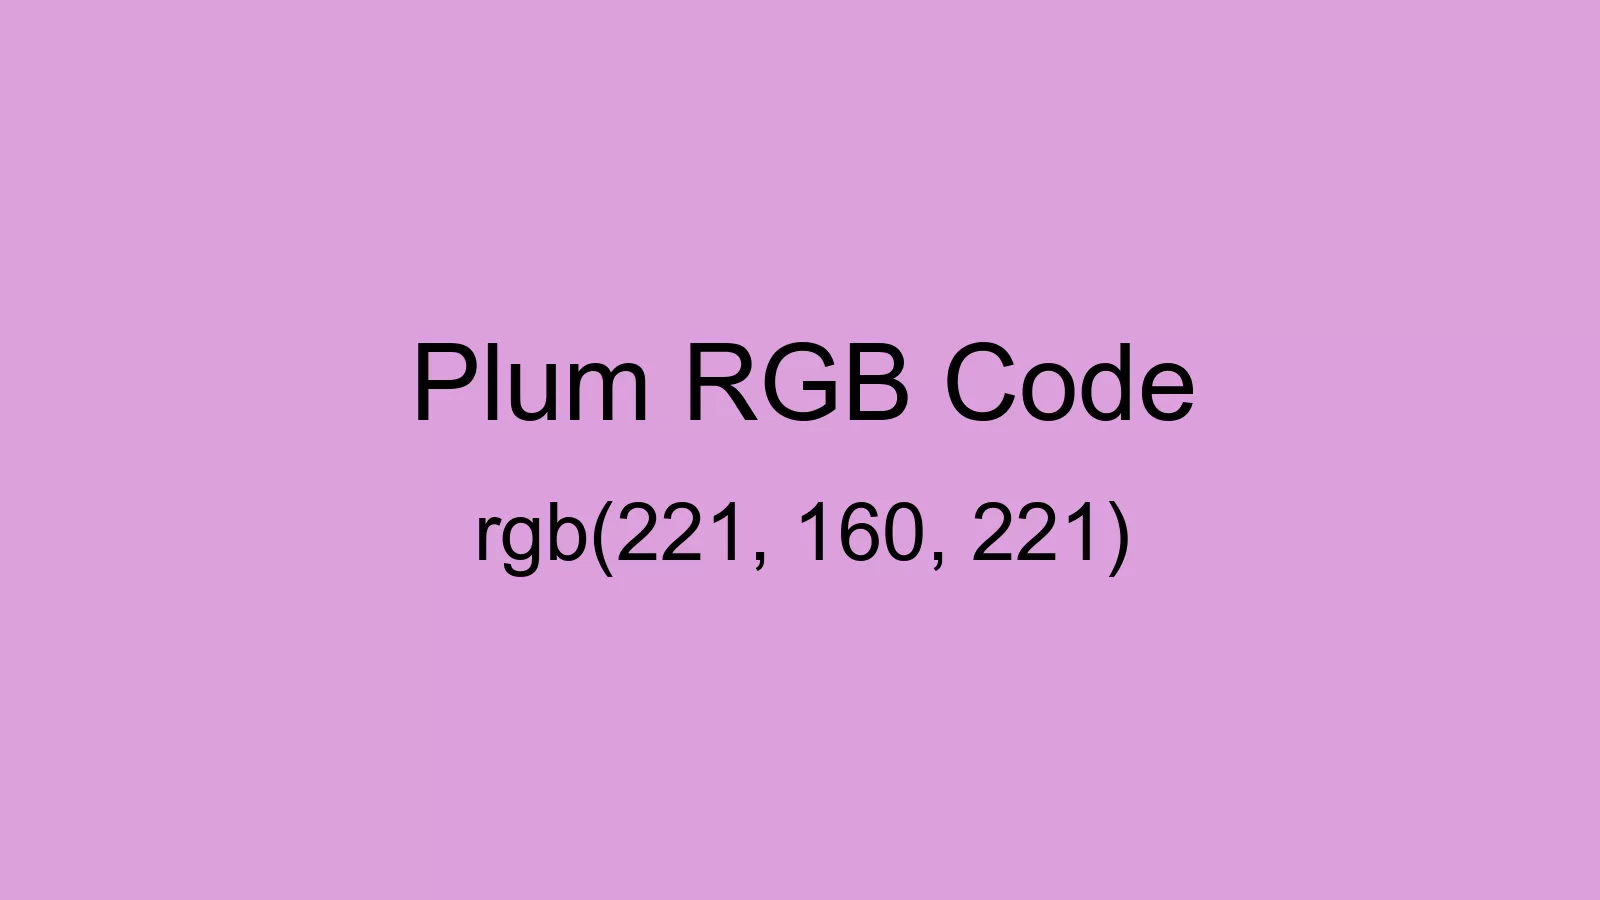 preview image of Plum color and RGB code